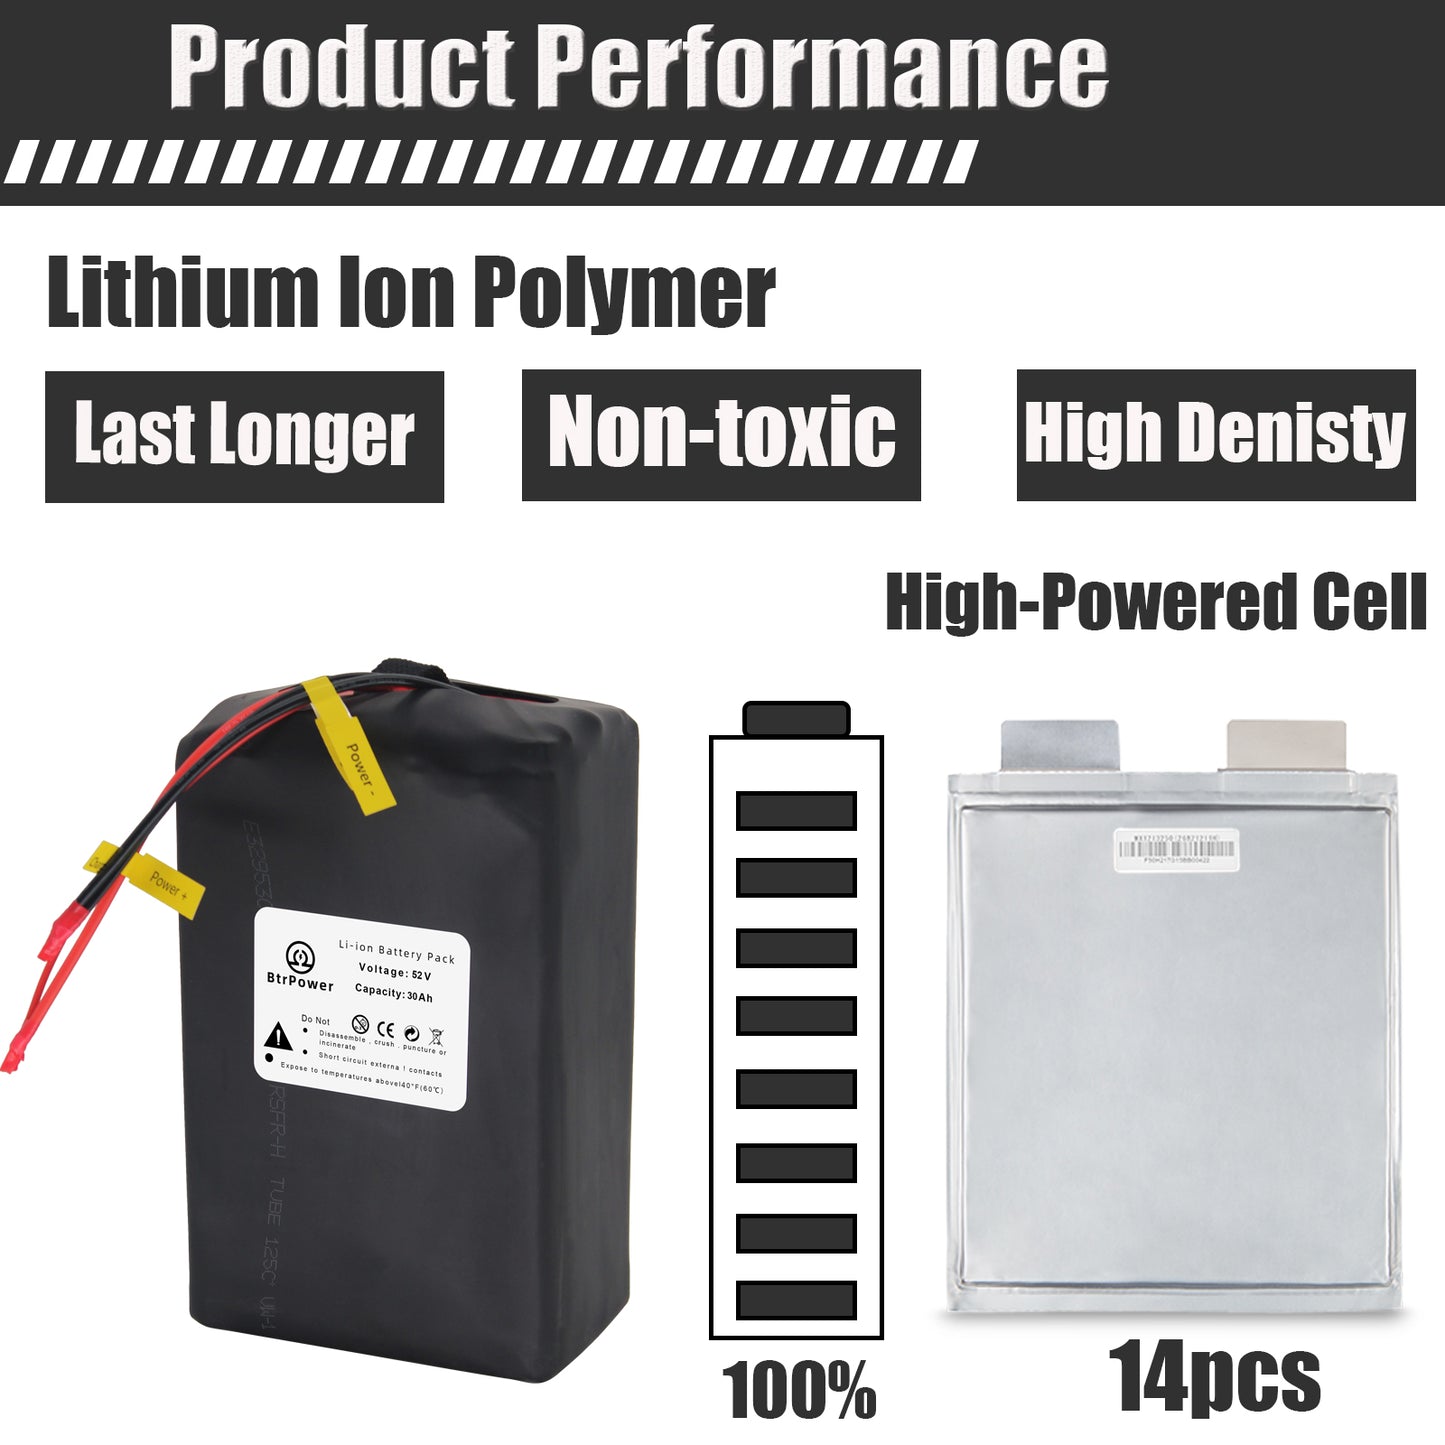 BtrPower EBike Battery 52V 30AH Li-ion Battery Pack with 5A Charger, 50A BMS